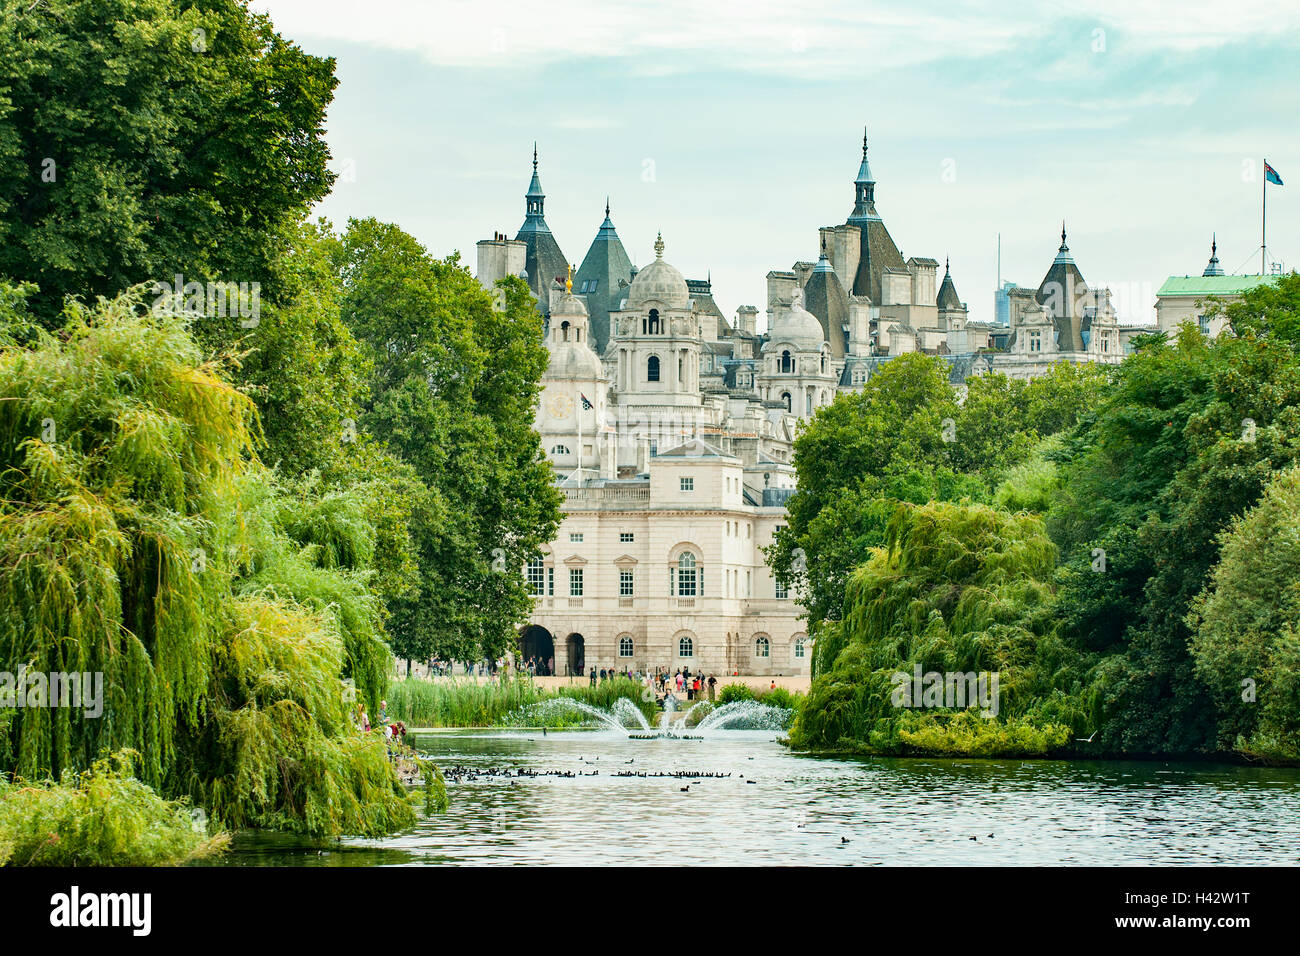 In Richtung Horseguards Parade aus St Jame Park See, London, England Stockfoto